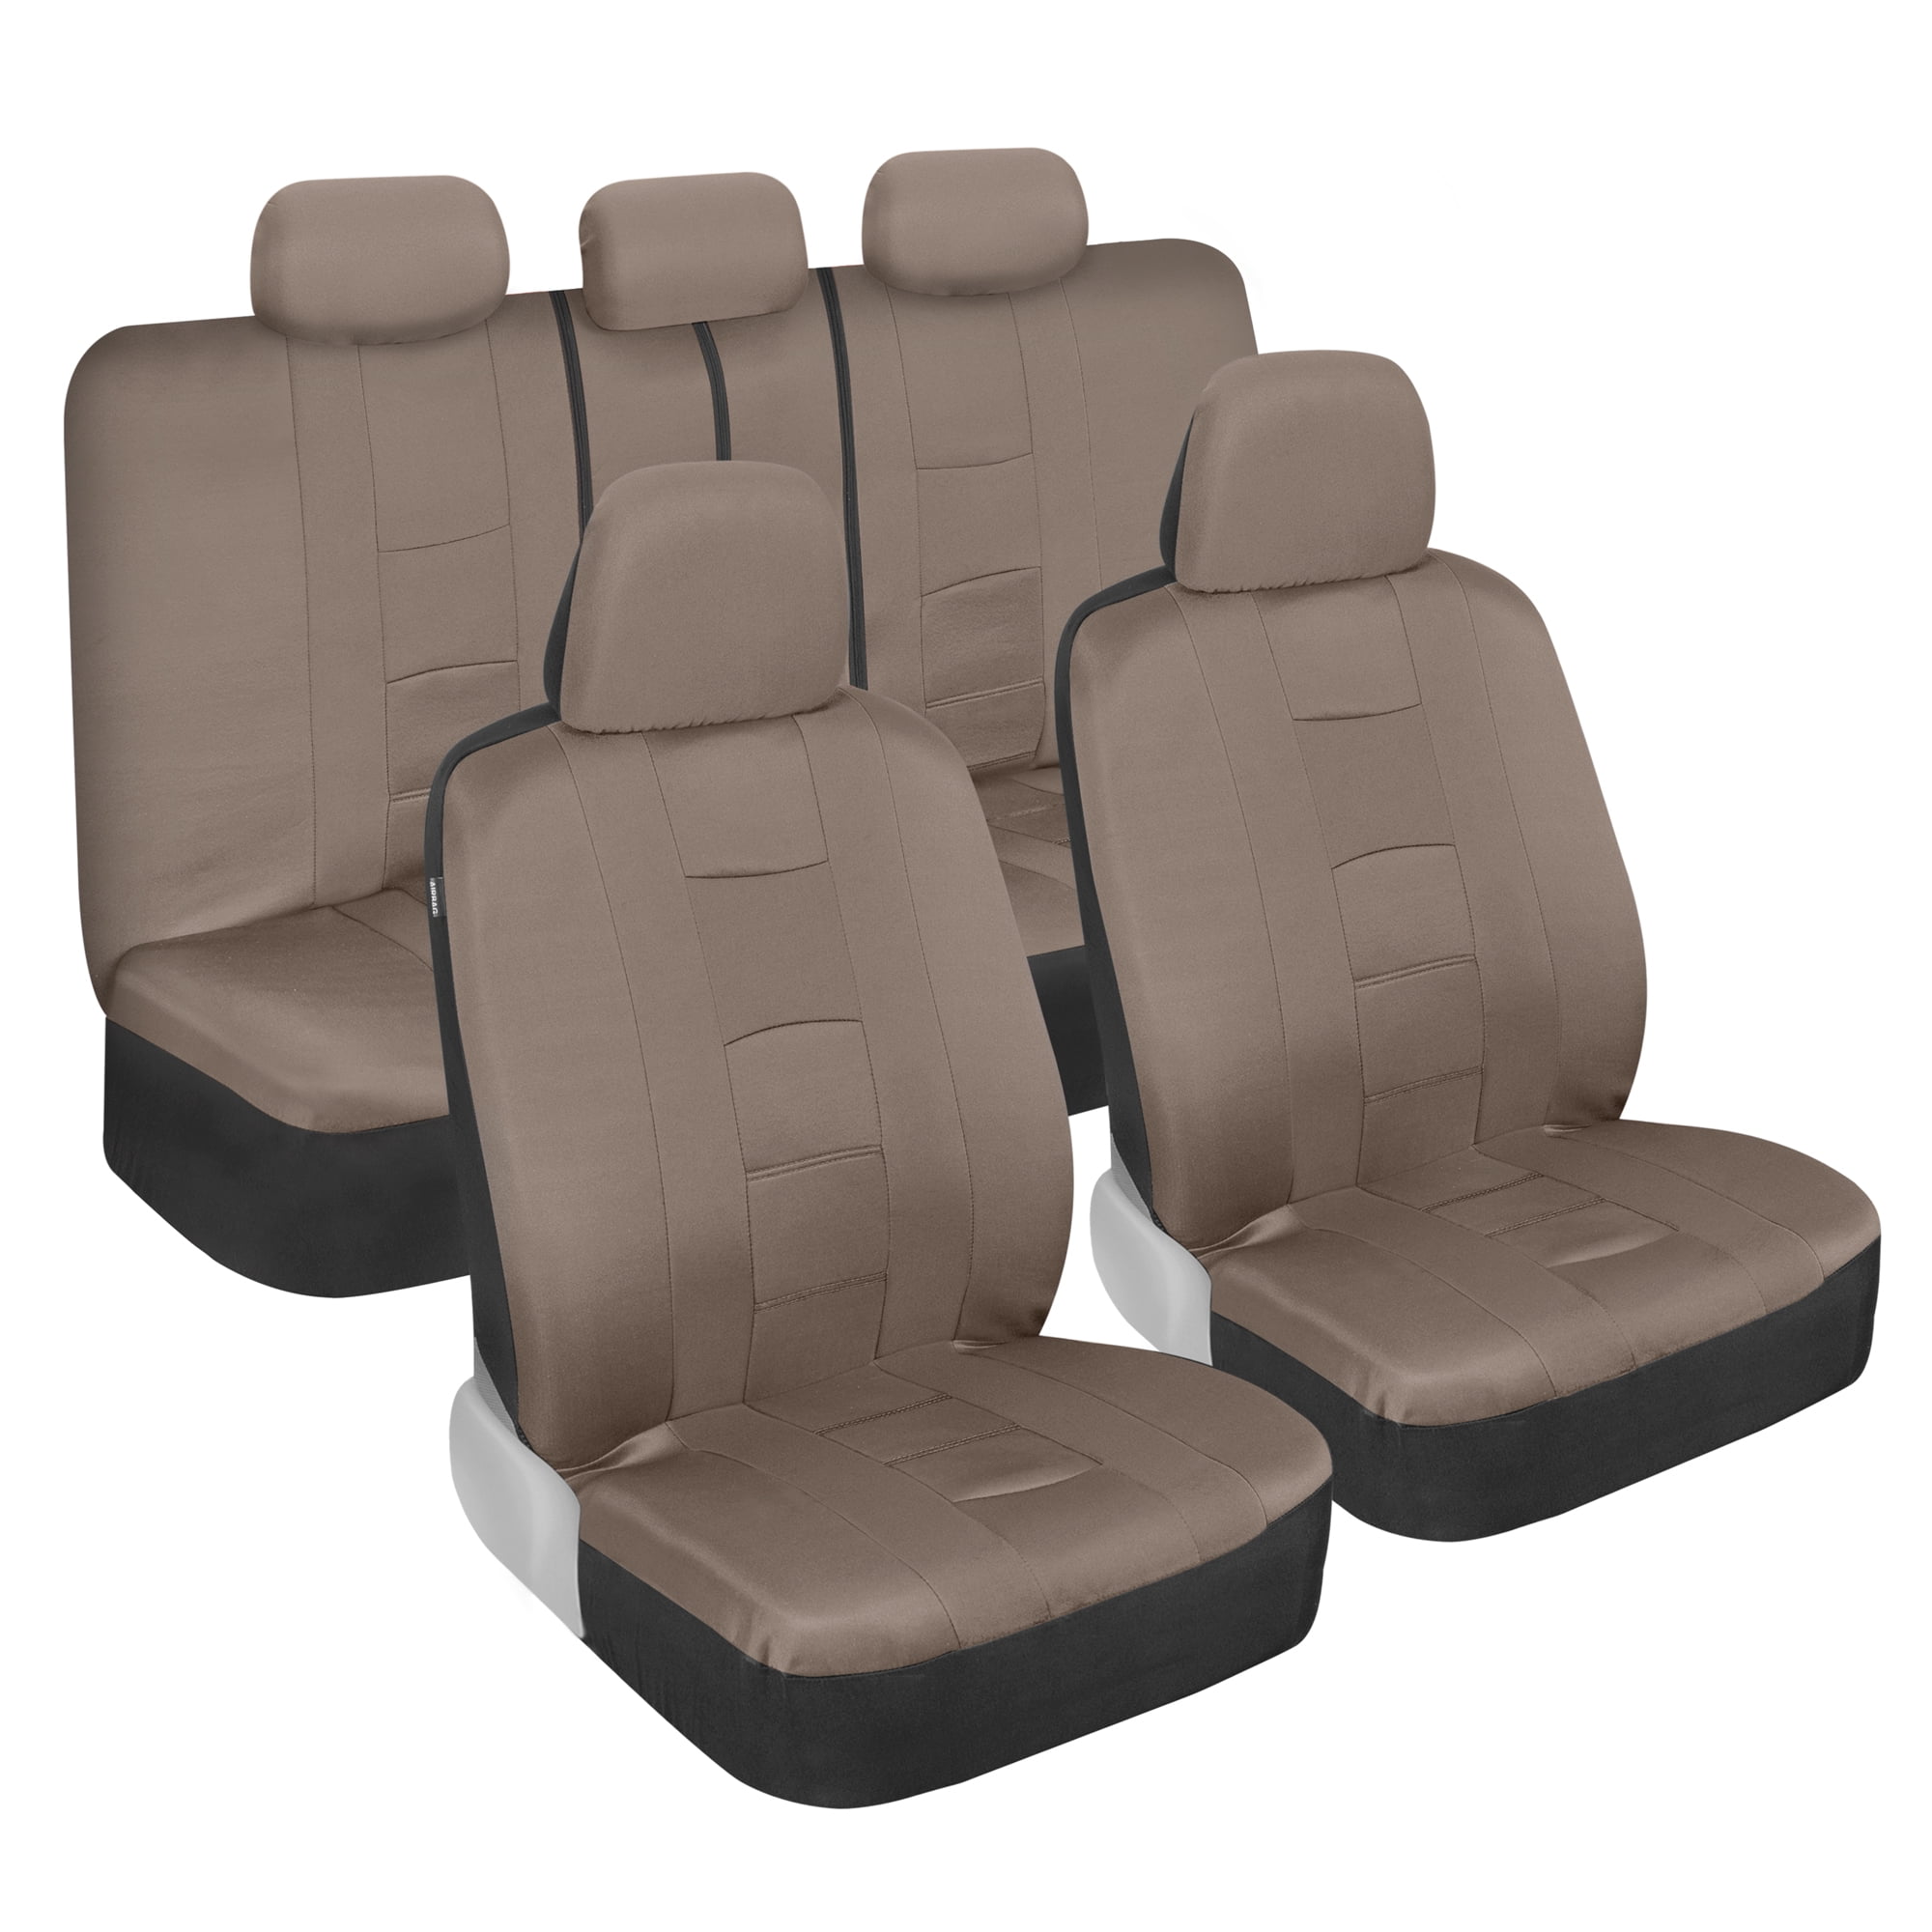 Bdk Carxs Forza Solid Gray Car Seat Covers Full Set Two-Tone Front Seat Covers with Matching Back Seat Cover for Cars PolyCloth Car Seat Protectors Wi